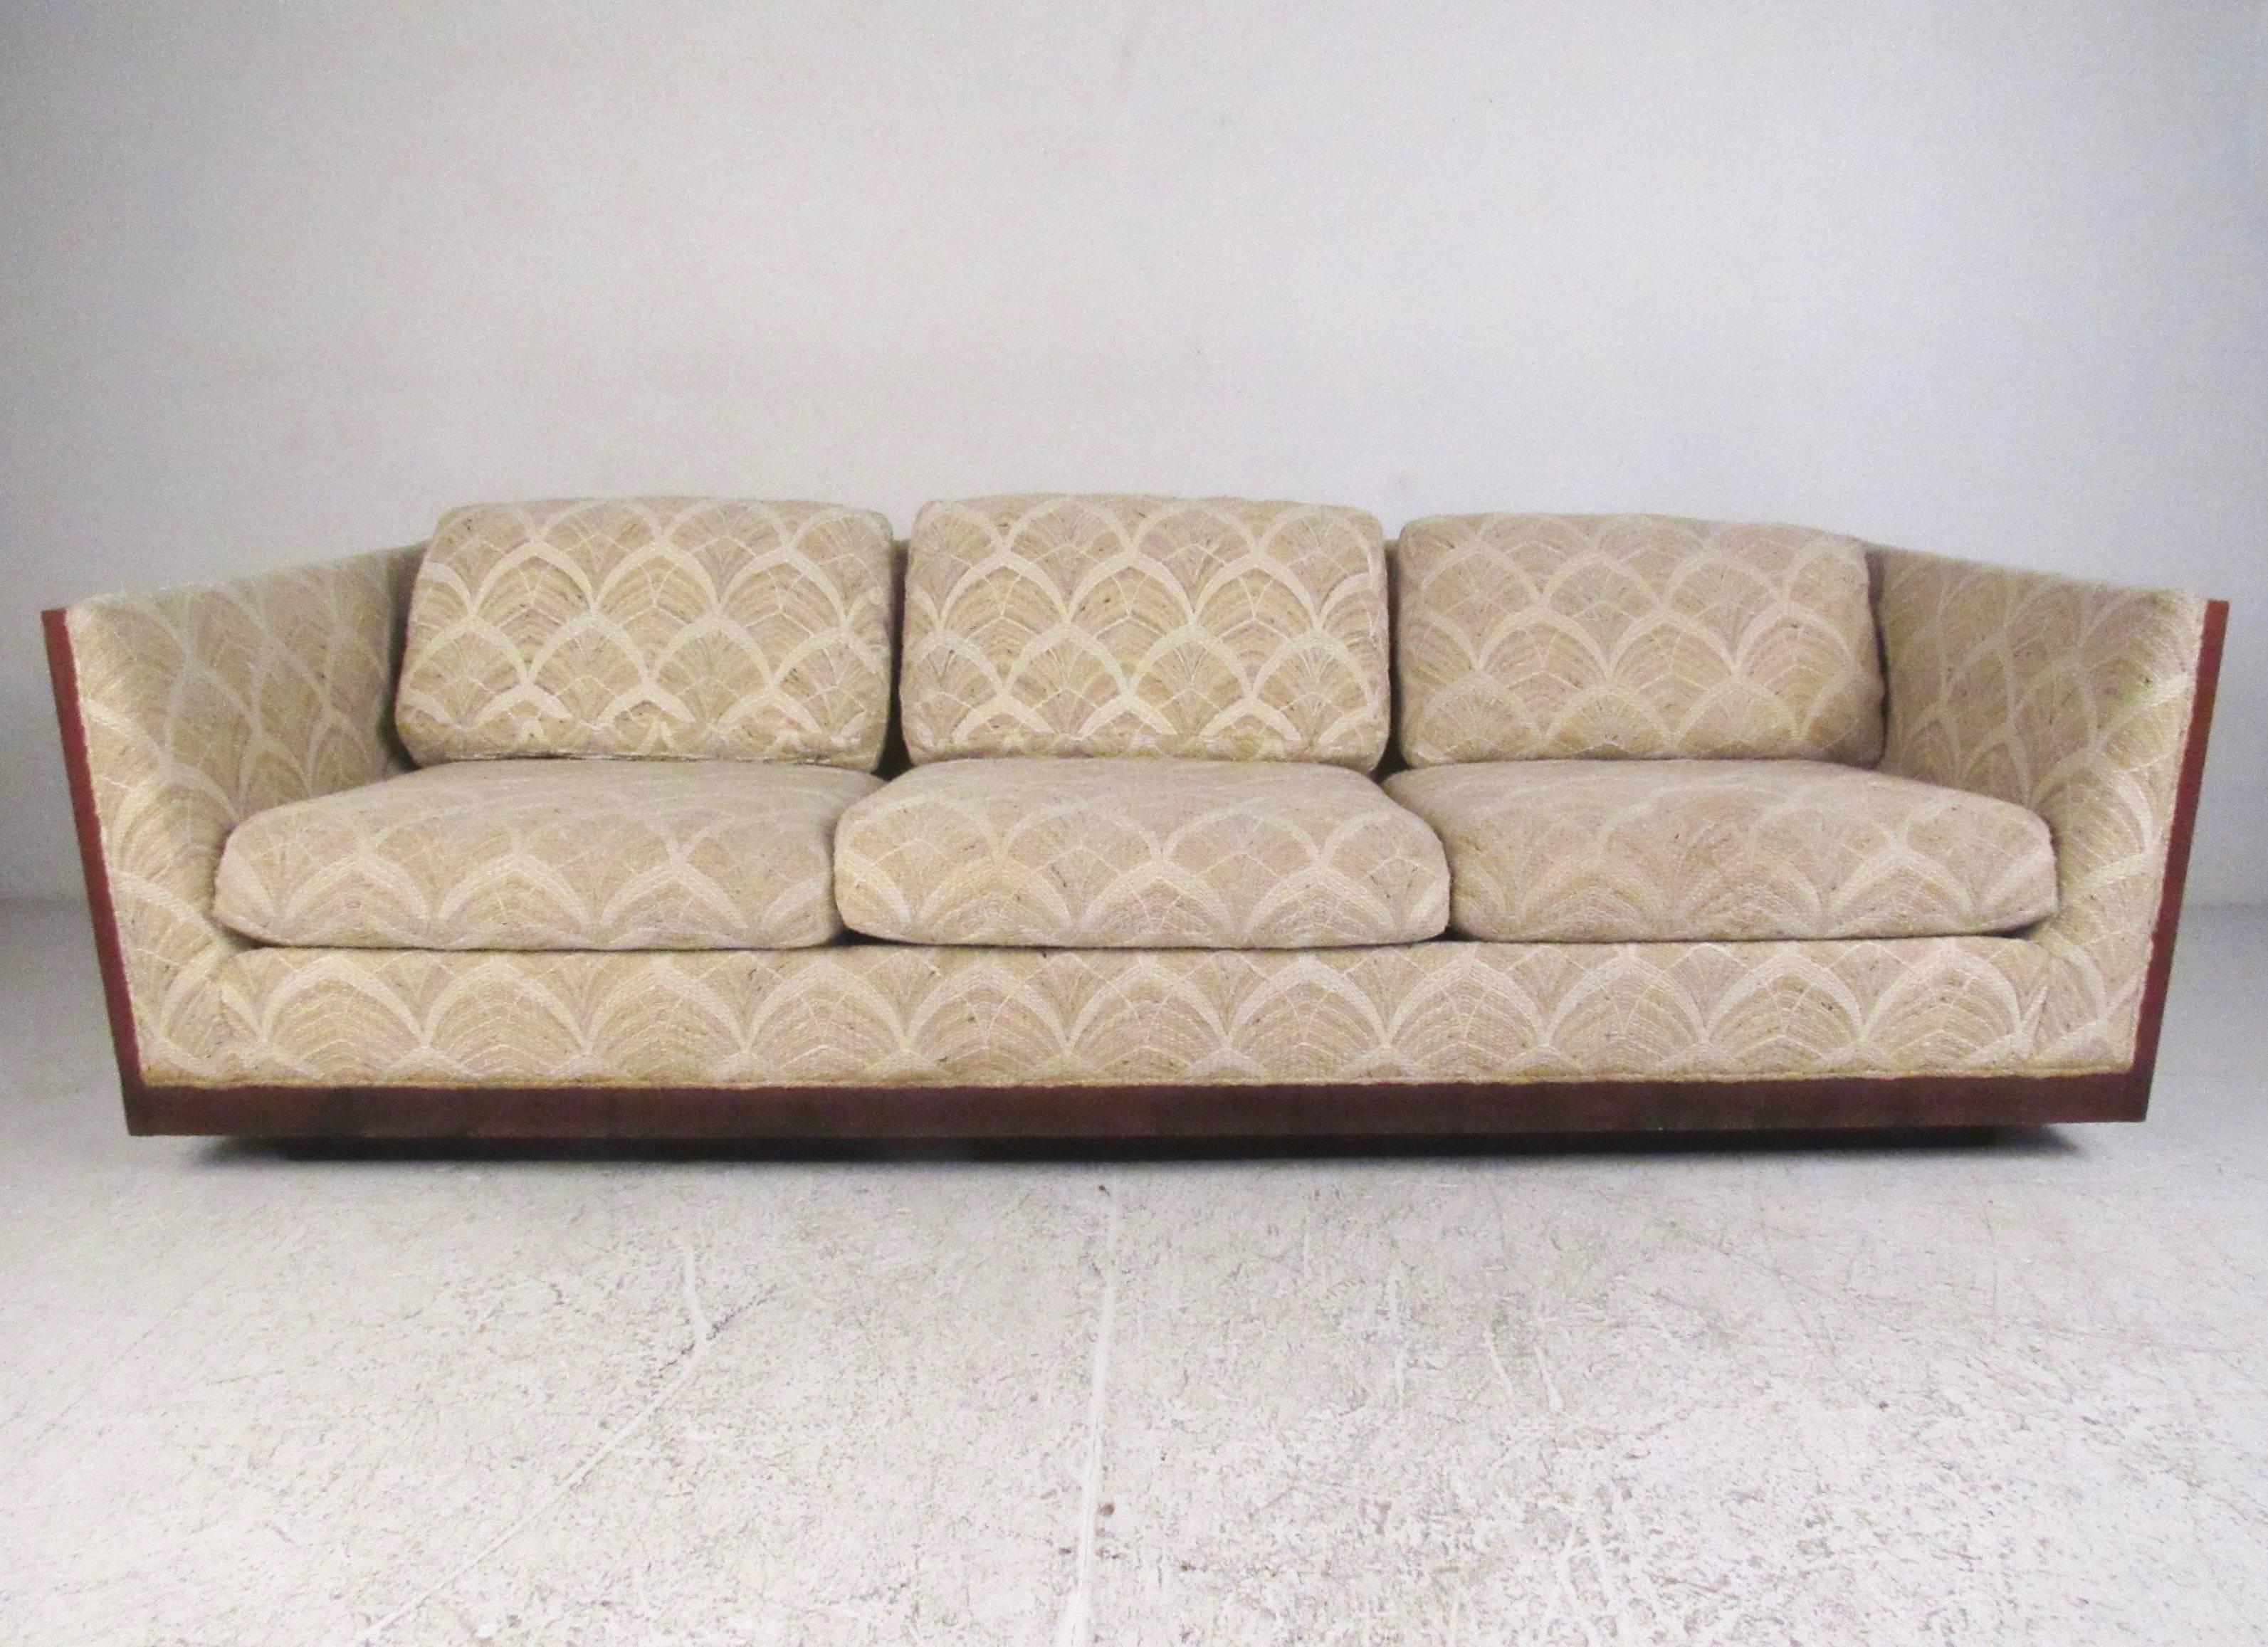 This stylish three-seat sofa features heavy teak frame and sturdy pedestal style base. Mid-Century Modern design in the style of Milo Baughman for Forecast Furniture, this large and impressive sofa makes a substantial addition to any seating area.